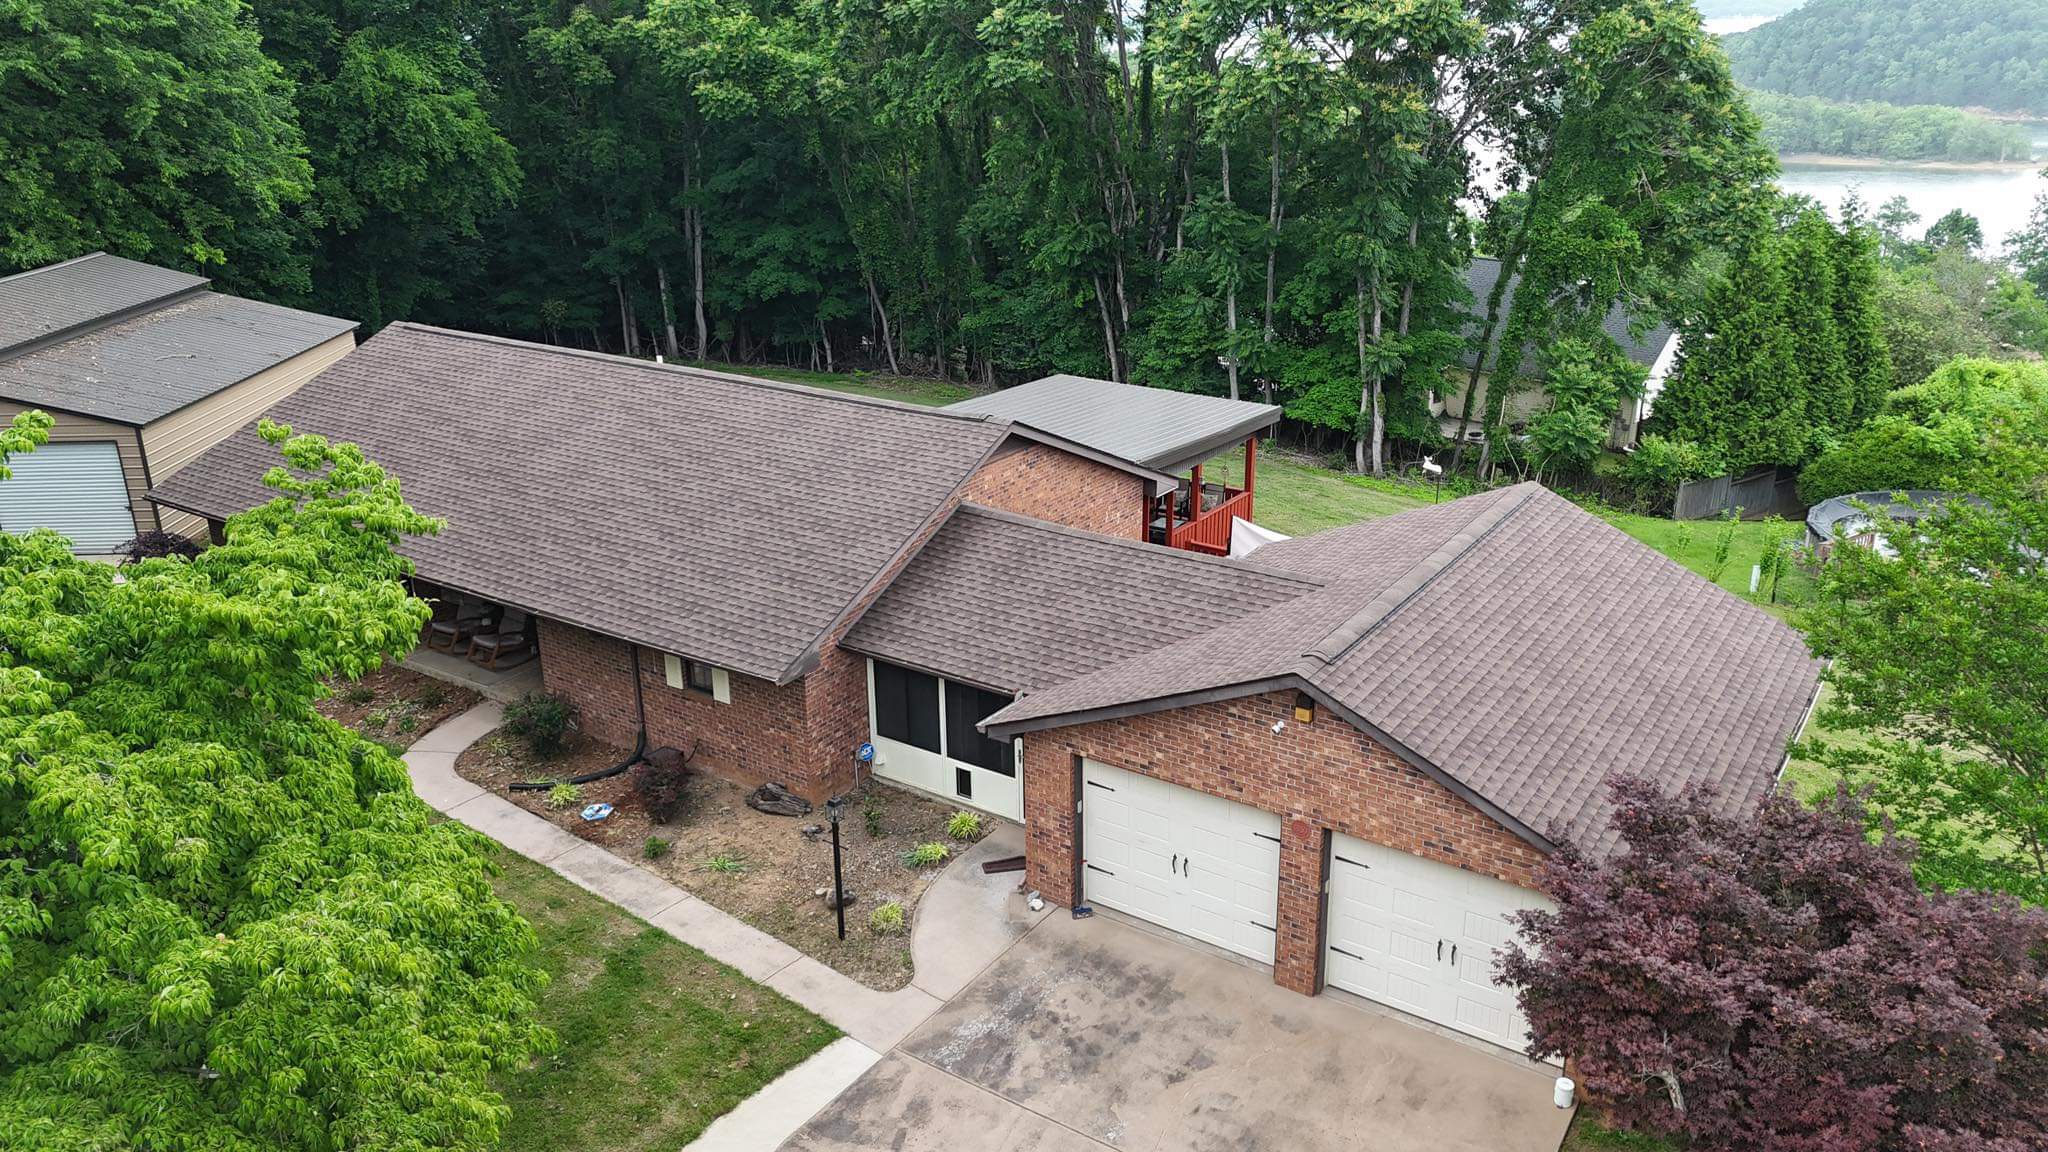  Unveiling Talbott's New Roof: GAF's Timberline Natural Shadow Barkwood Shingles